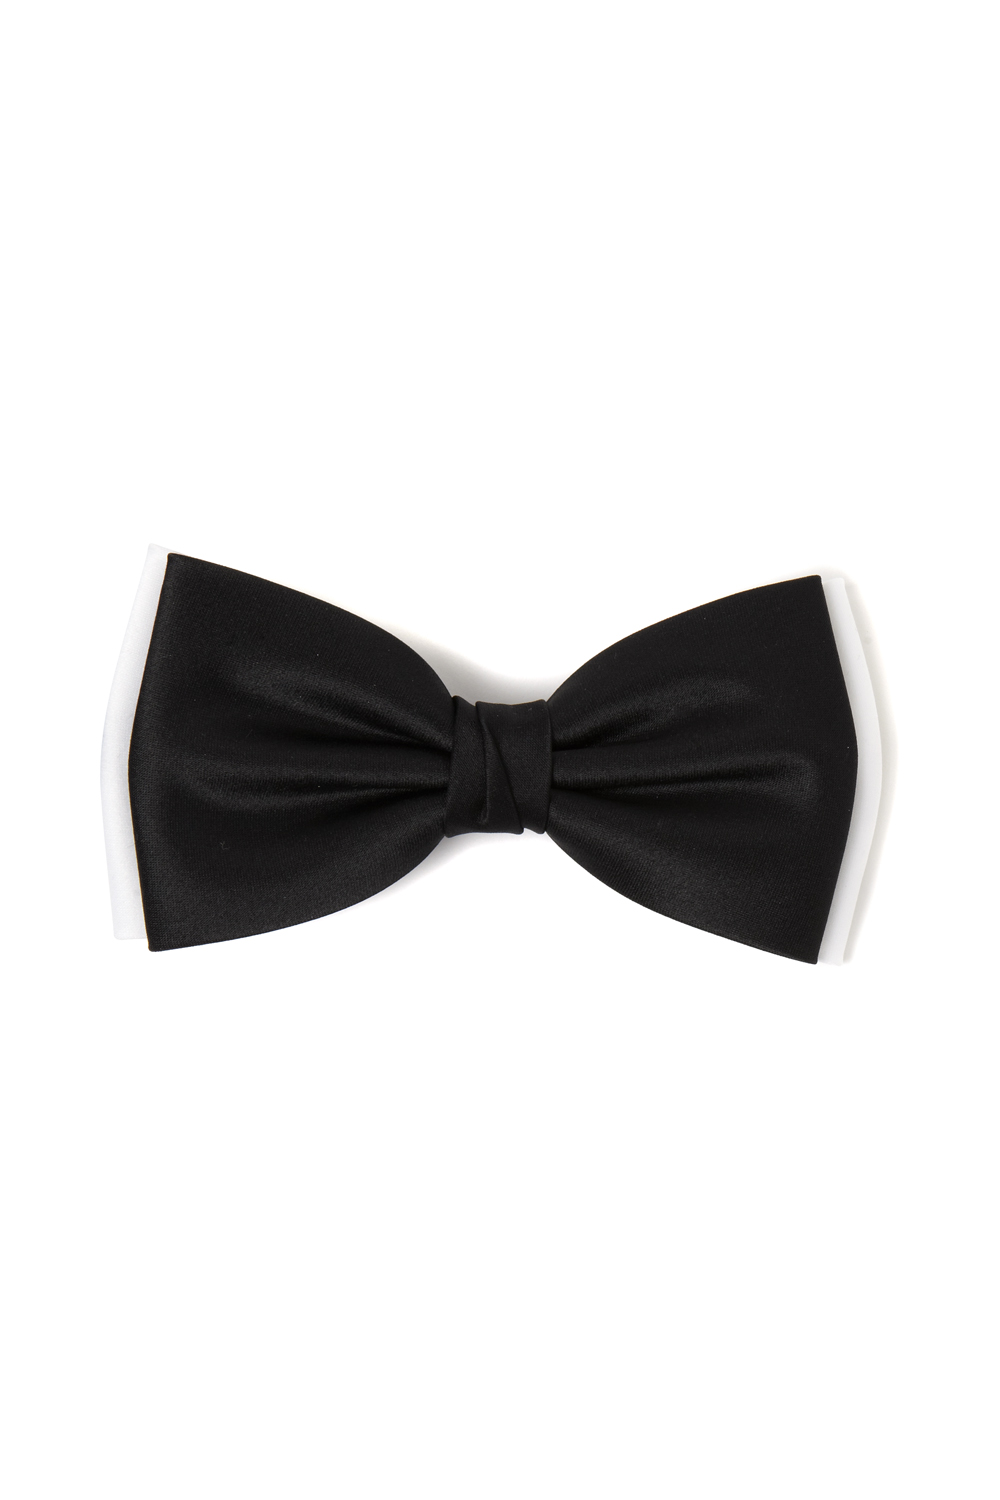 25 Bow Tie Pictures Free Cliparts That You Can Download To You